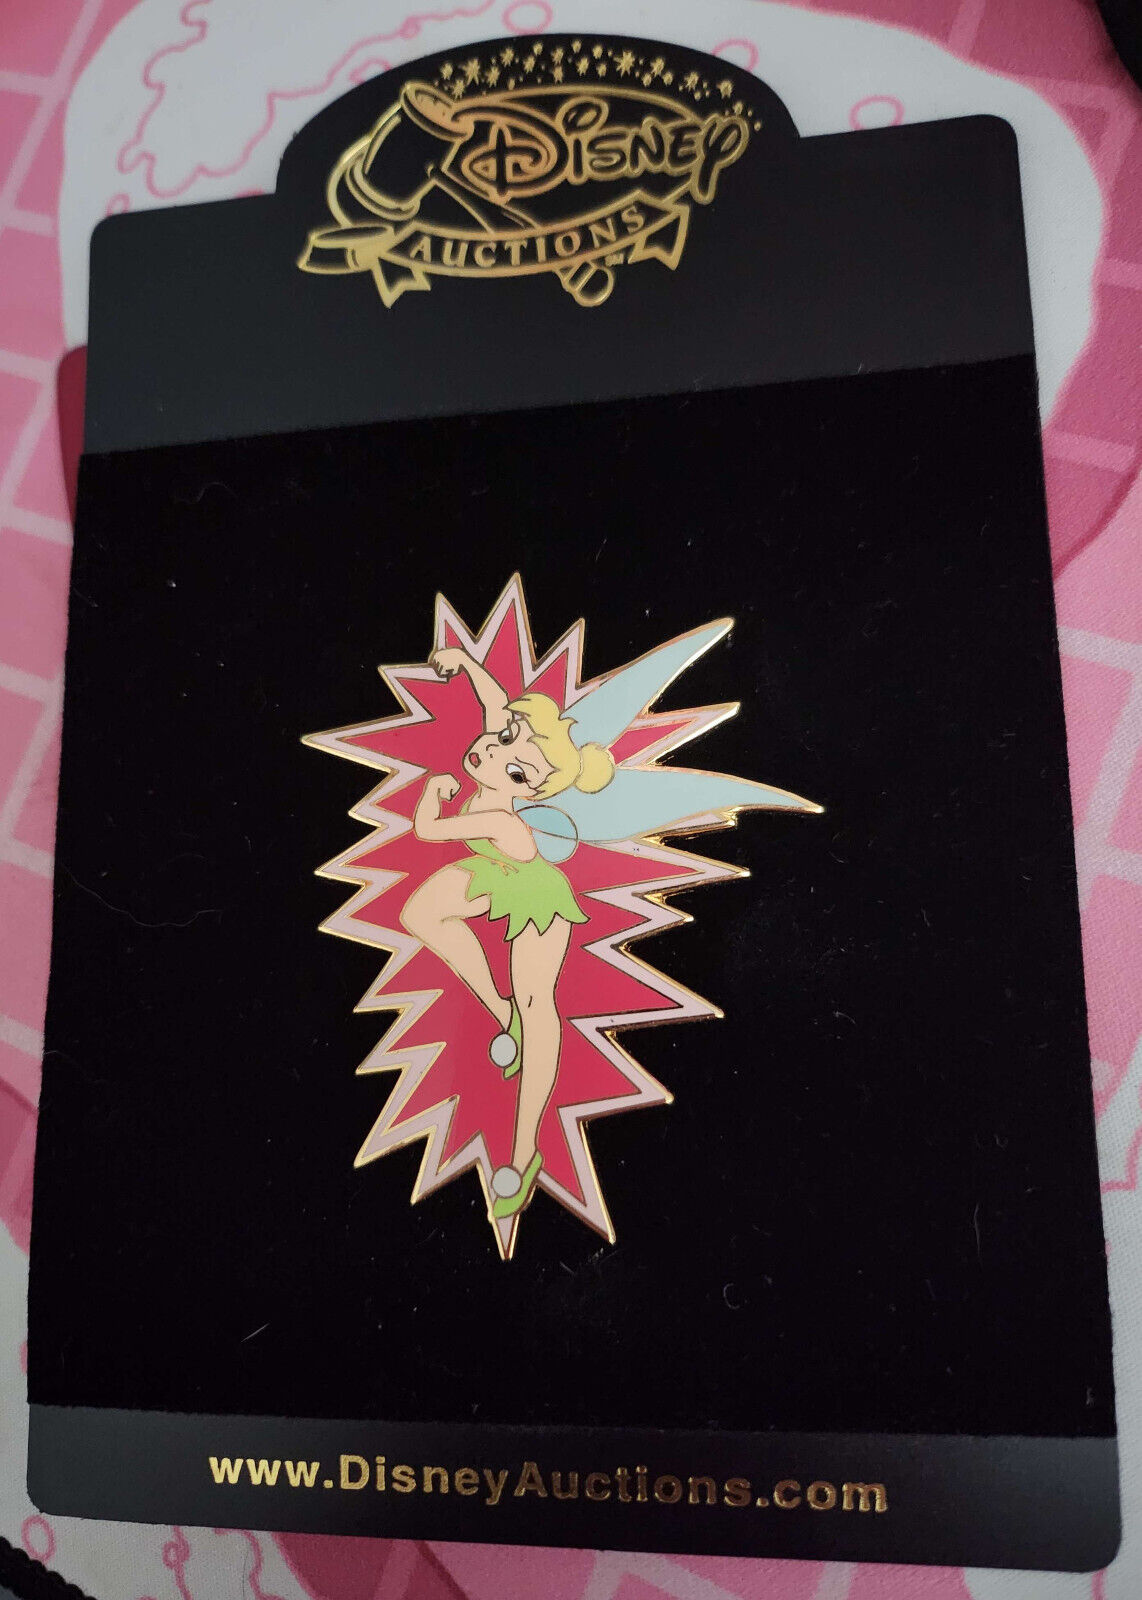 Disney Auctions Tinker Bell in Action Starburst LE 500 Disney Pin 37213